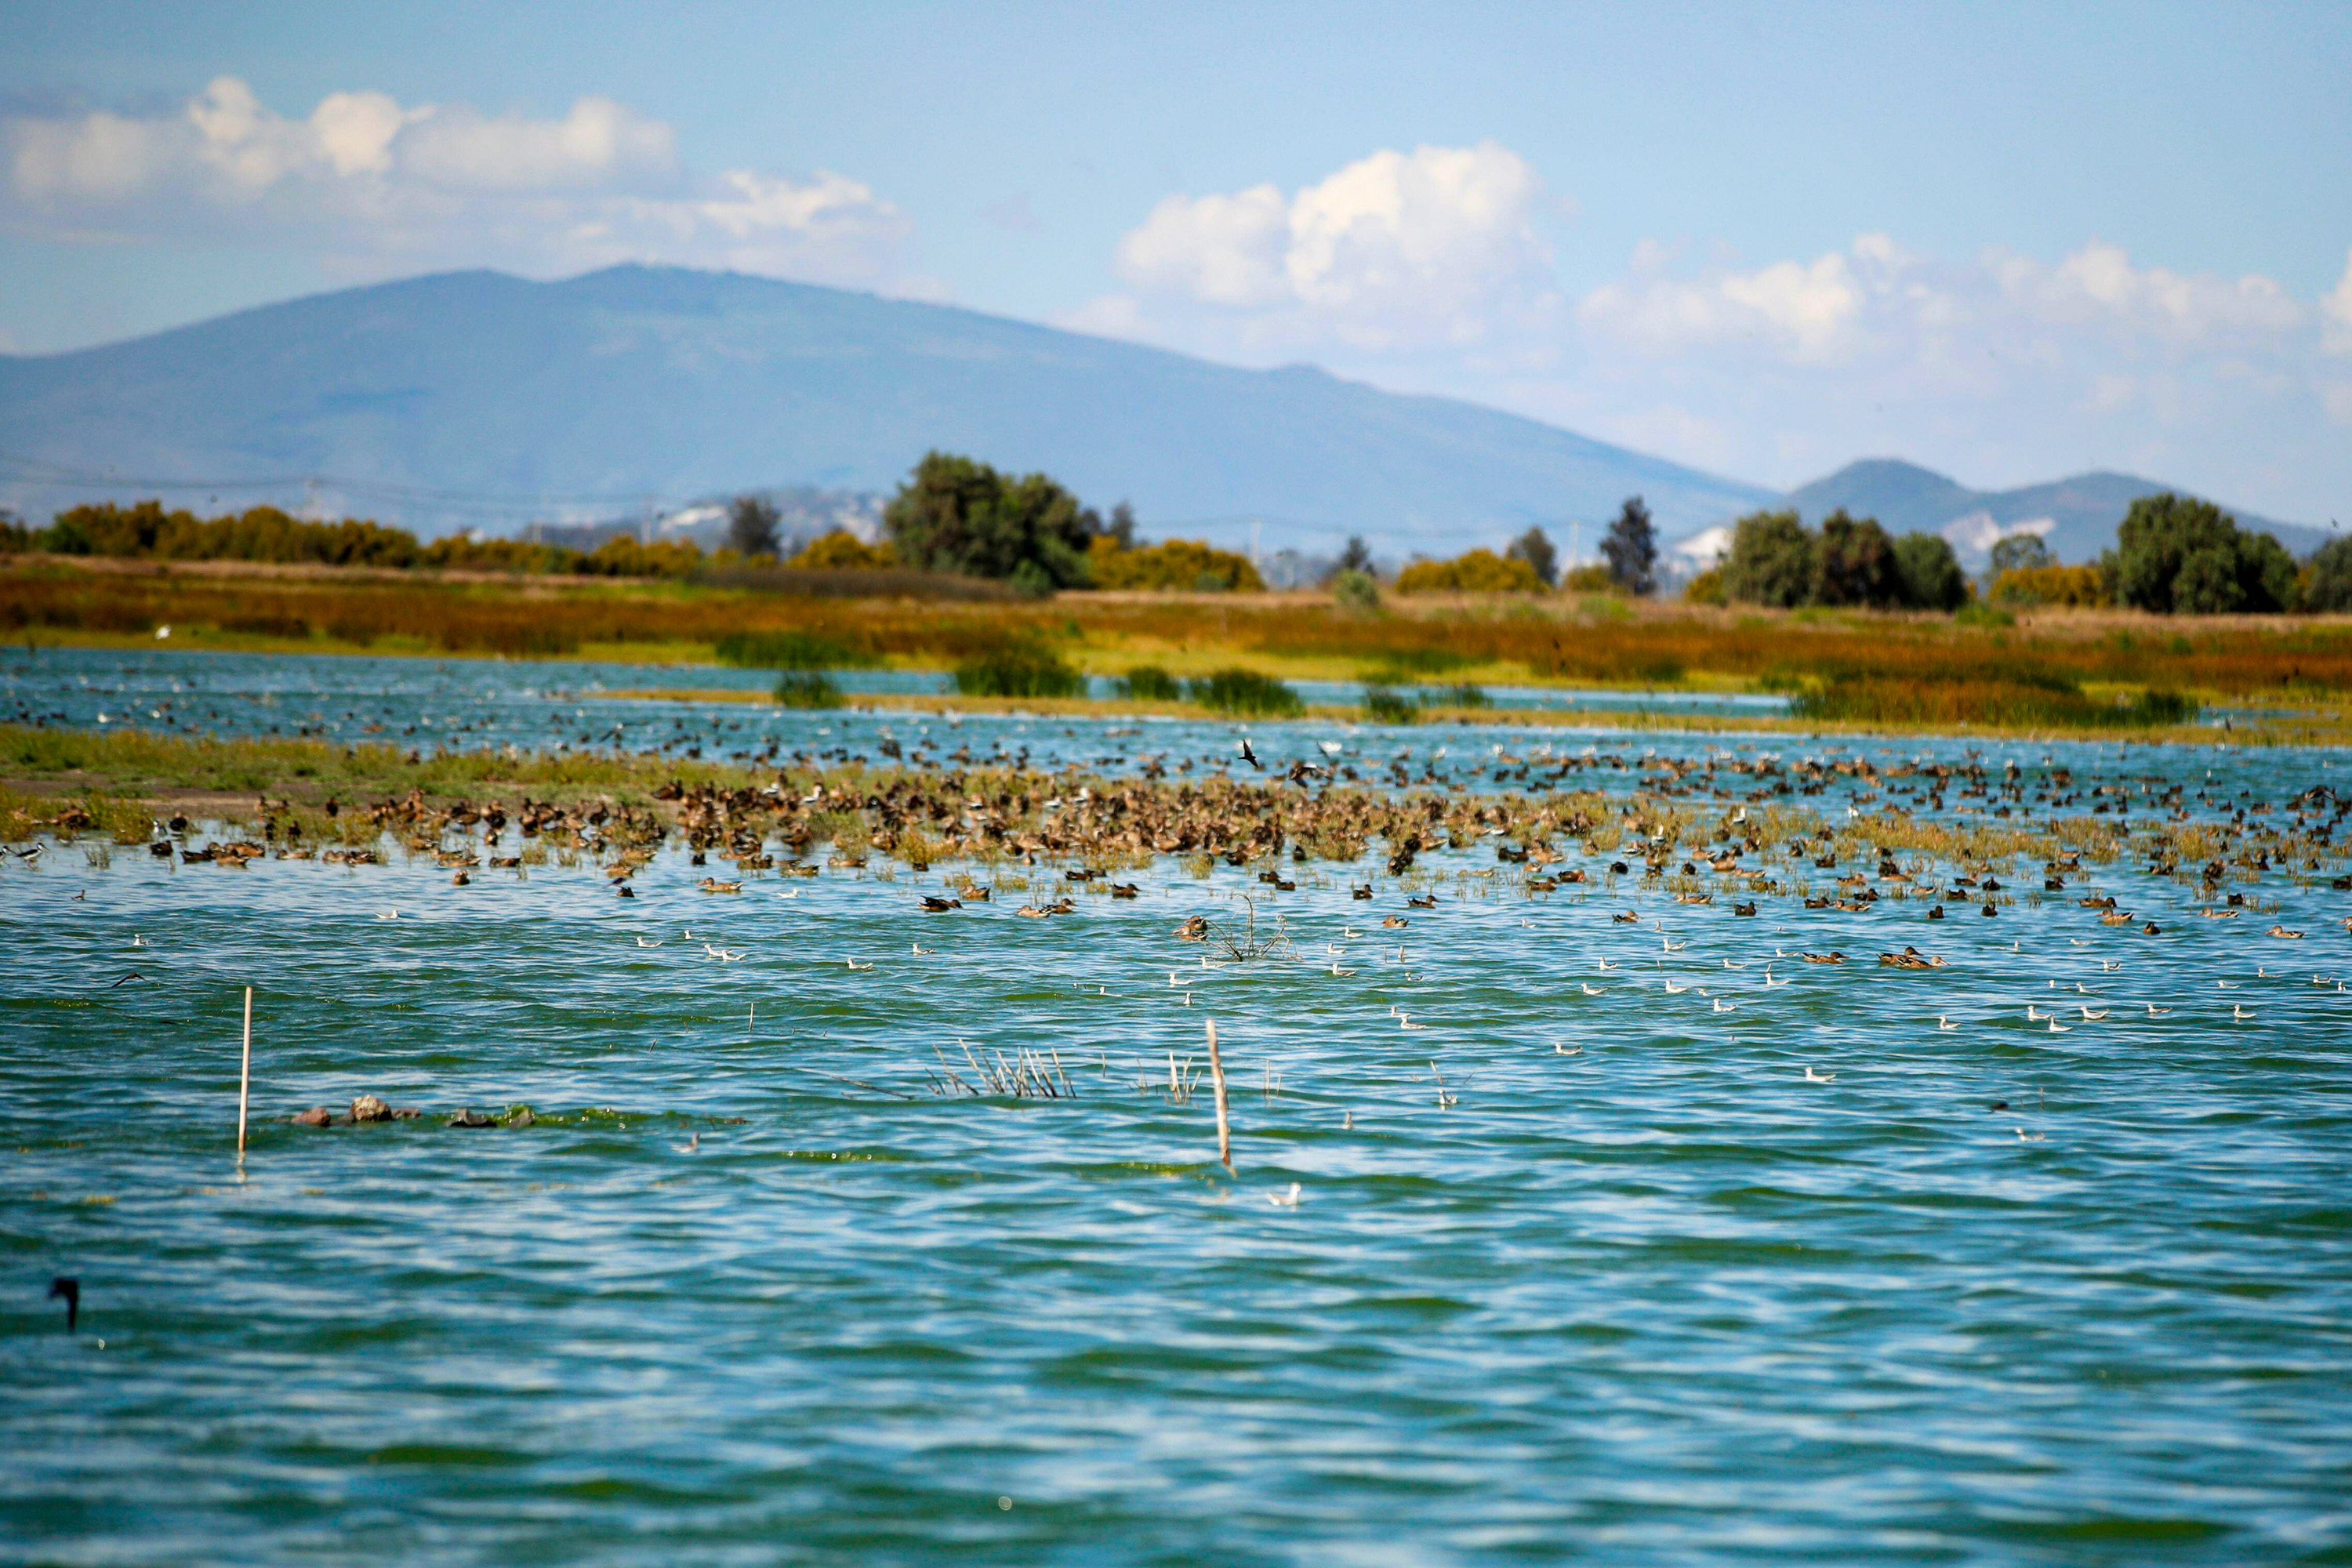 Birds in the Texcoco lake